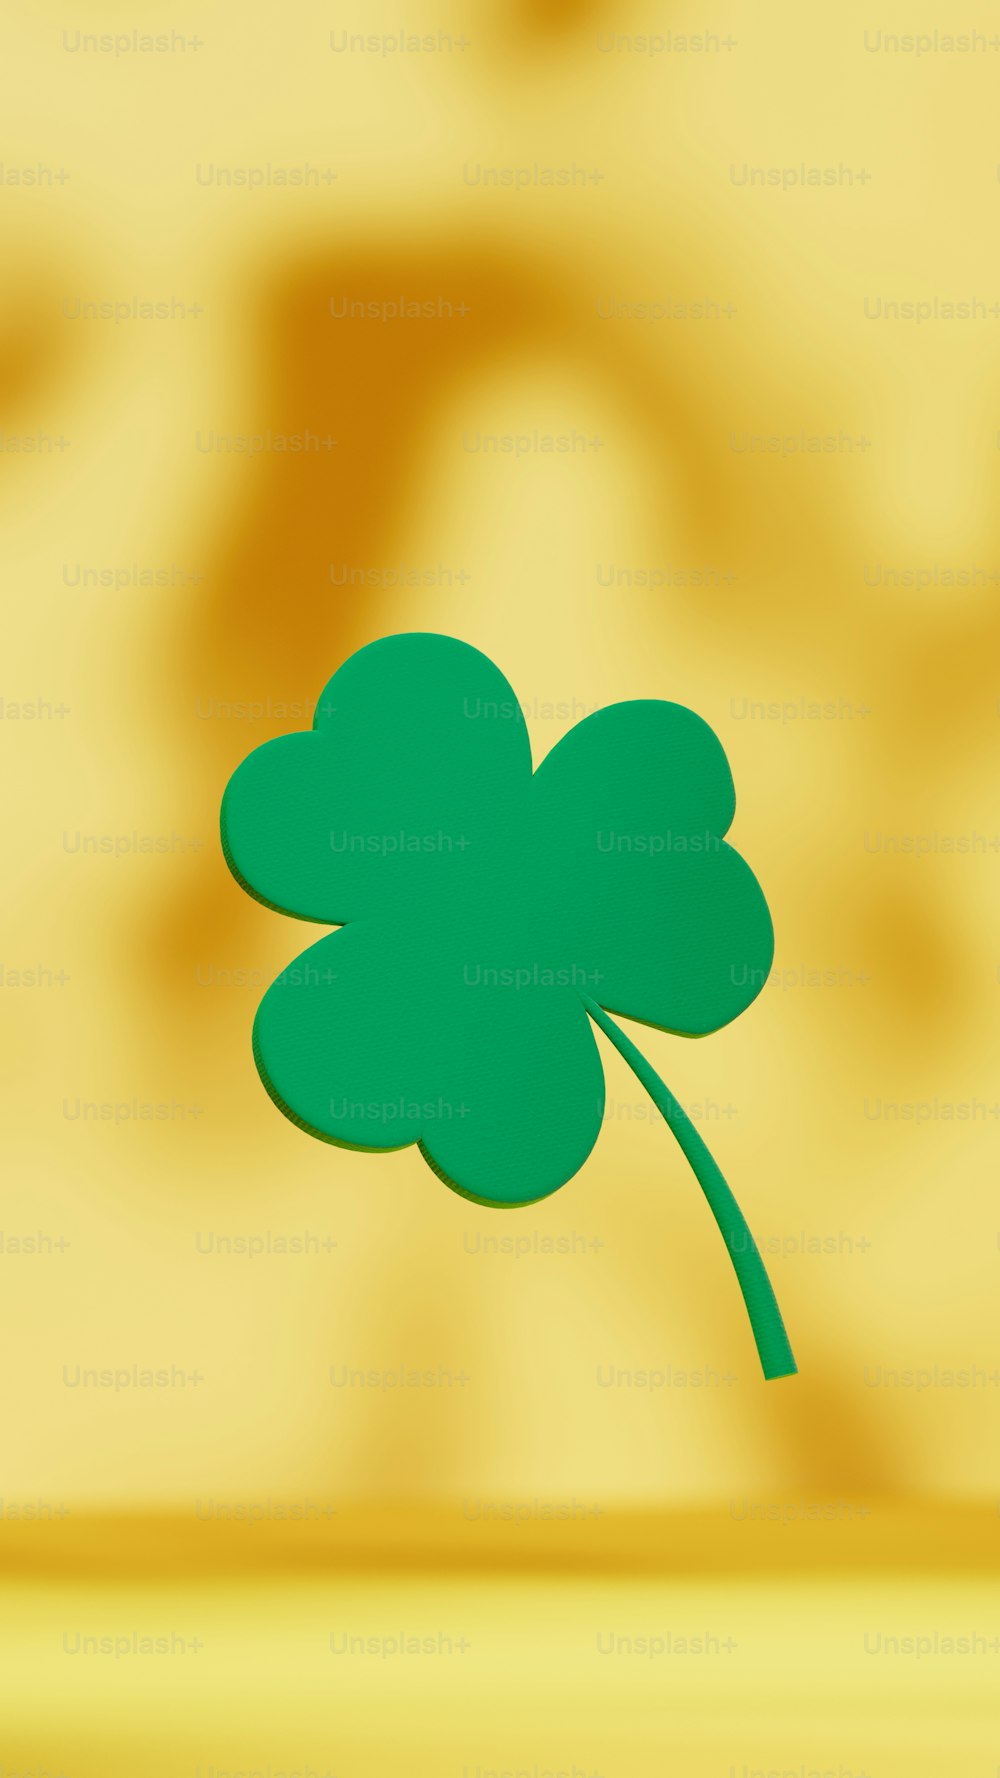 a green four leaf clover on a yellow background